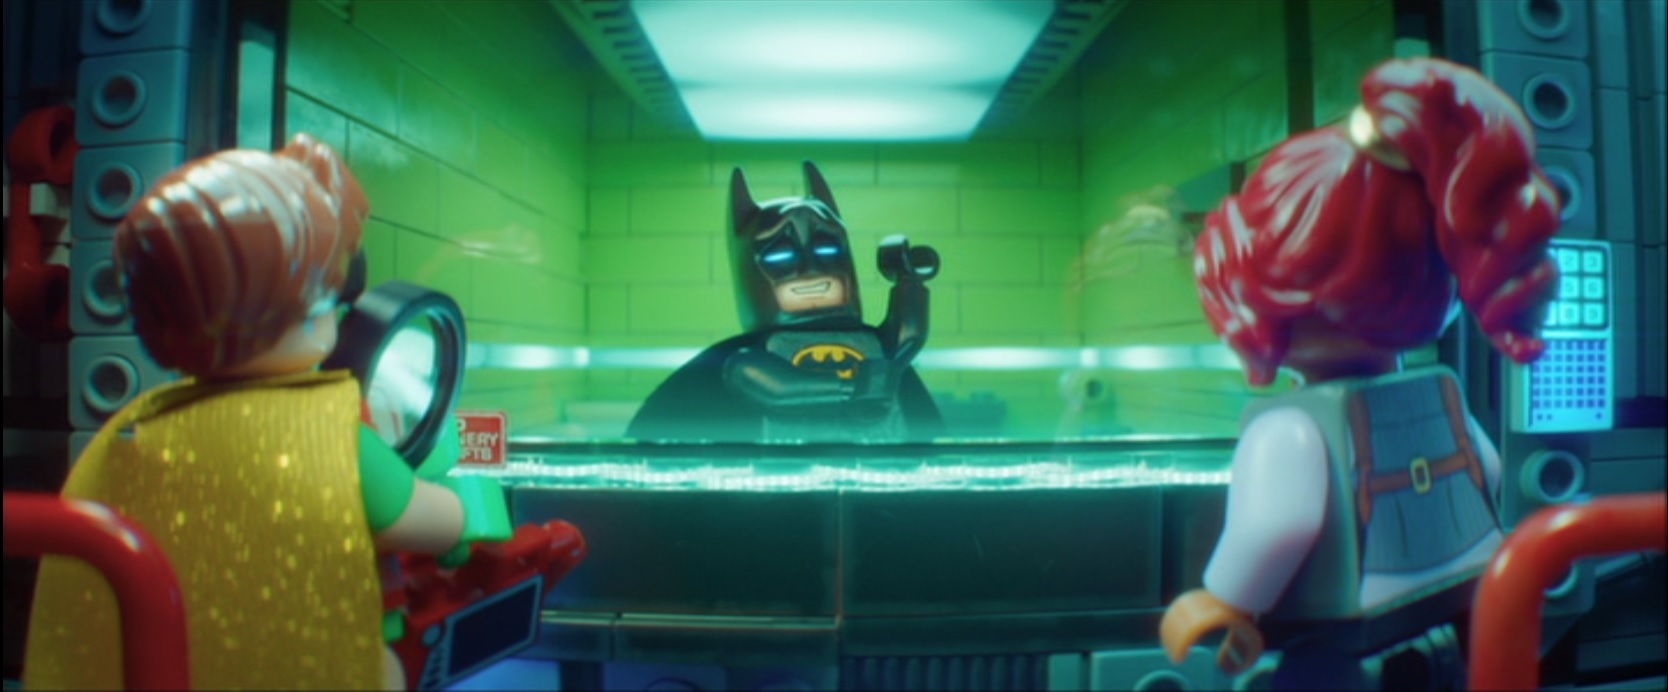 The LEGO Batman Sequel You'll Never Get To See